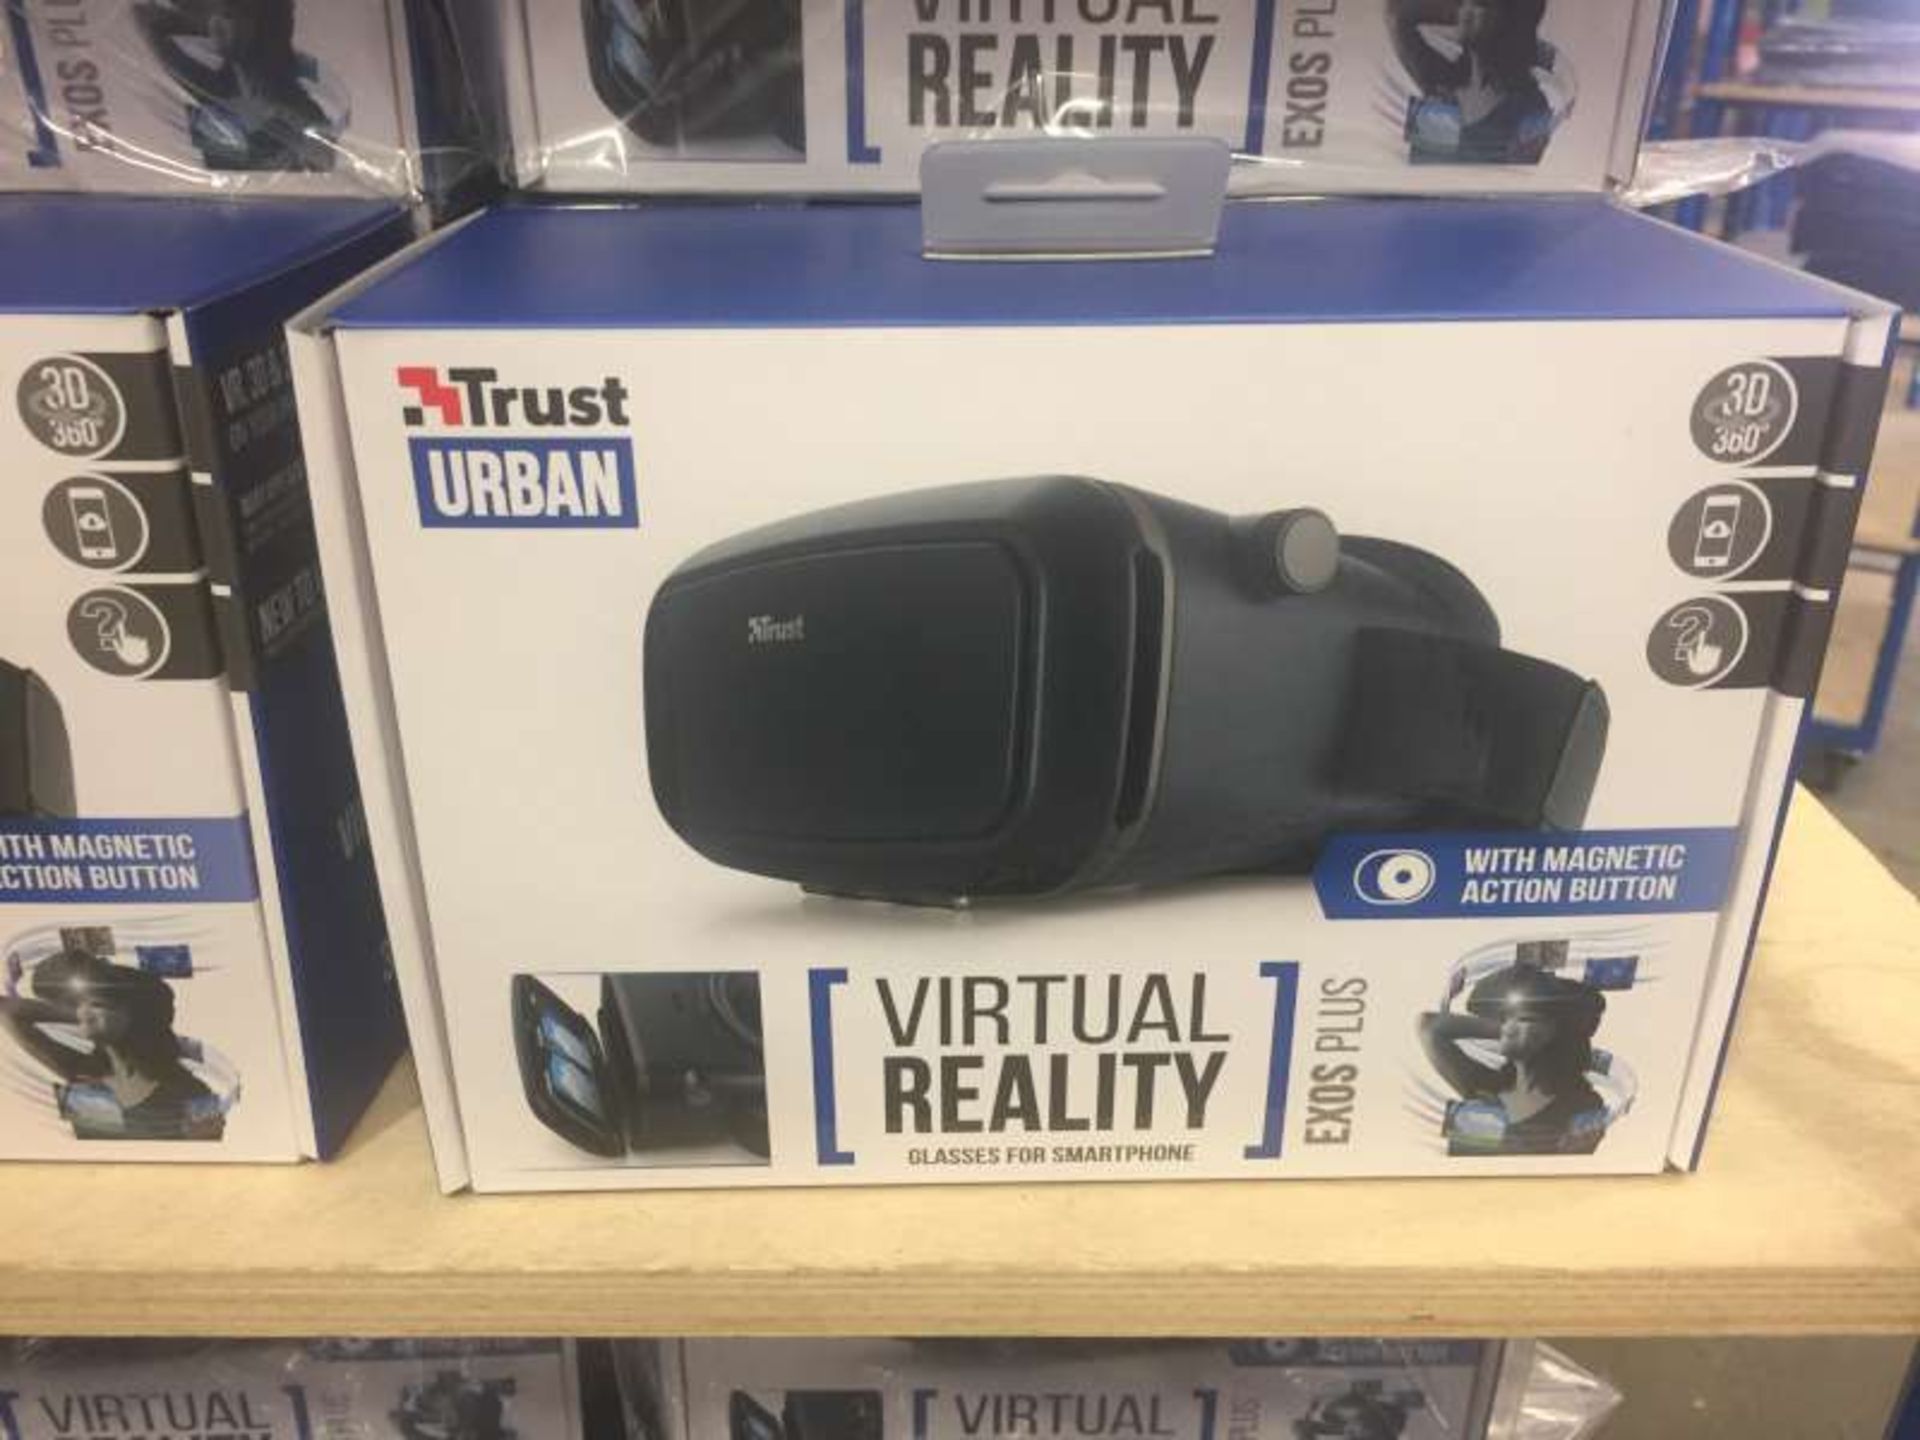 10 X BRAND NEW BOXED TRUST URBAN VIRTUAL REALITY GLASSES FOR SMARTPHONES